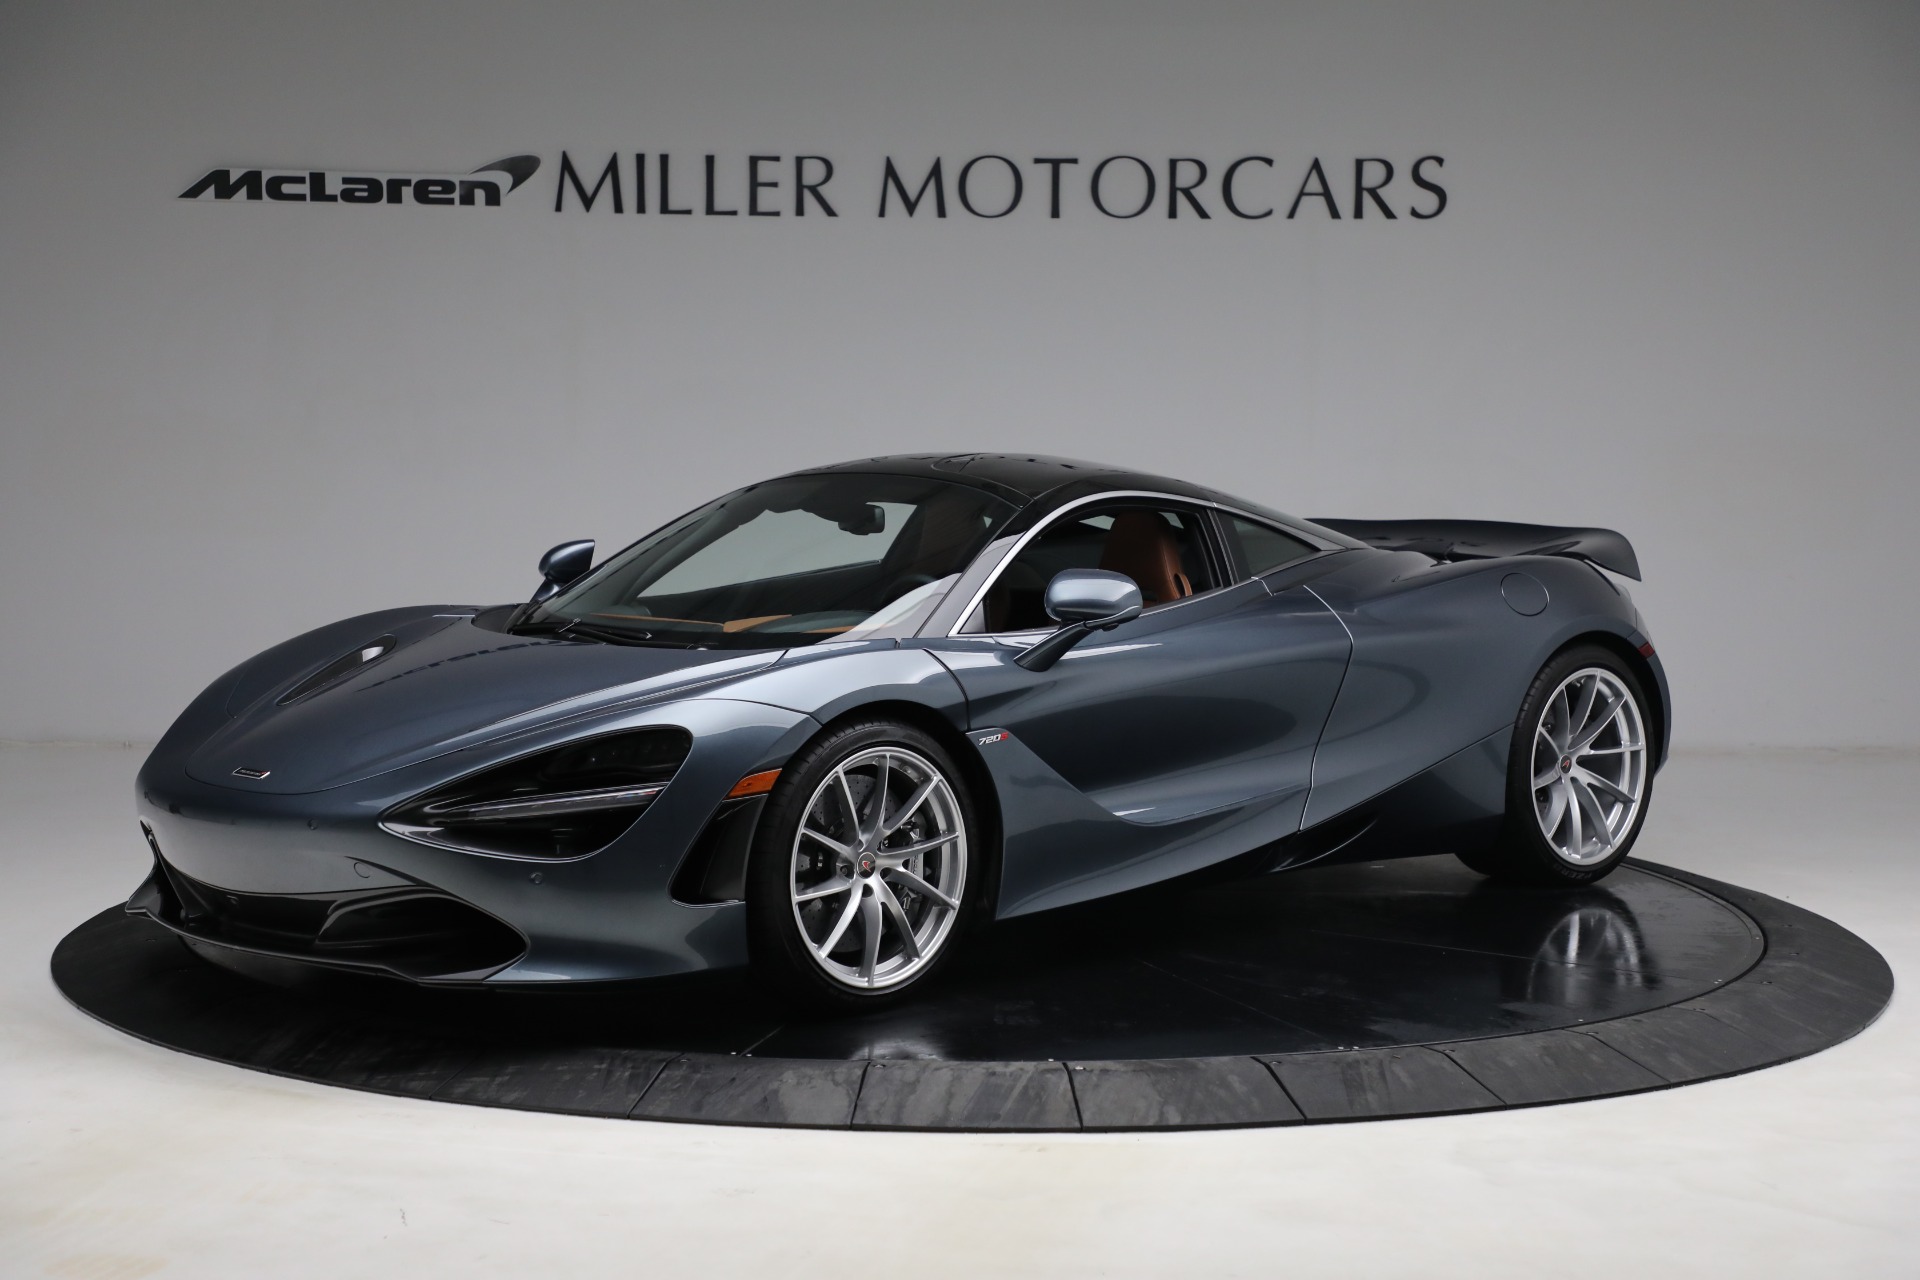 Used 2018 McLaren 720S Luxury for sale Sold at McLaren Greenwich in Greenwich CT 06830 1